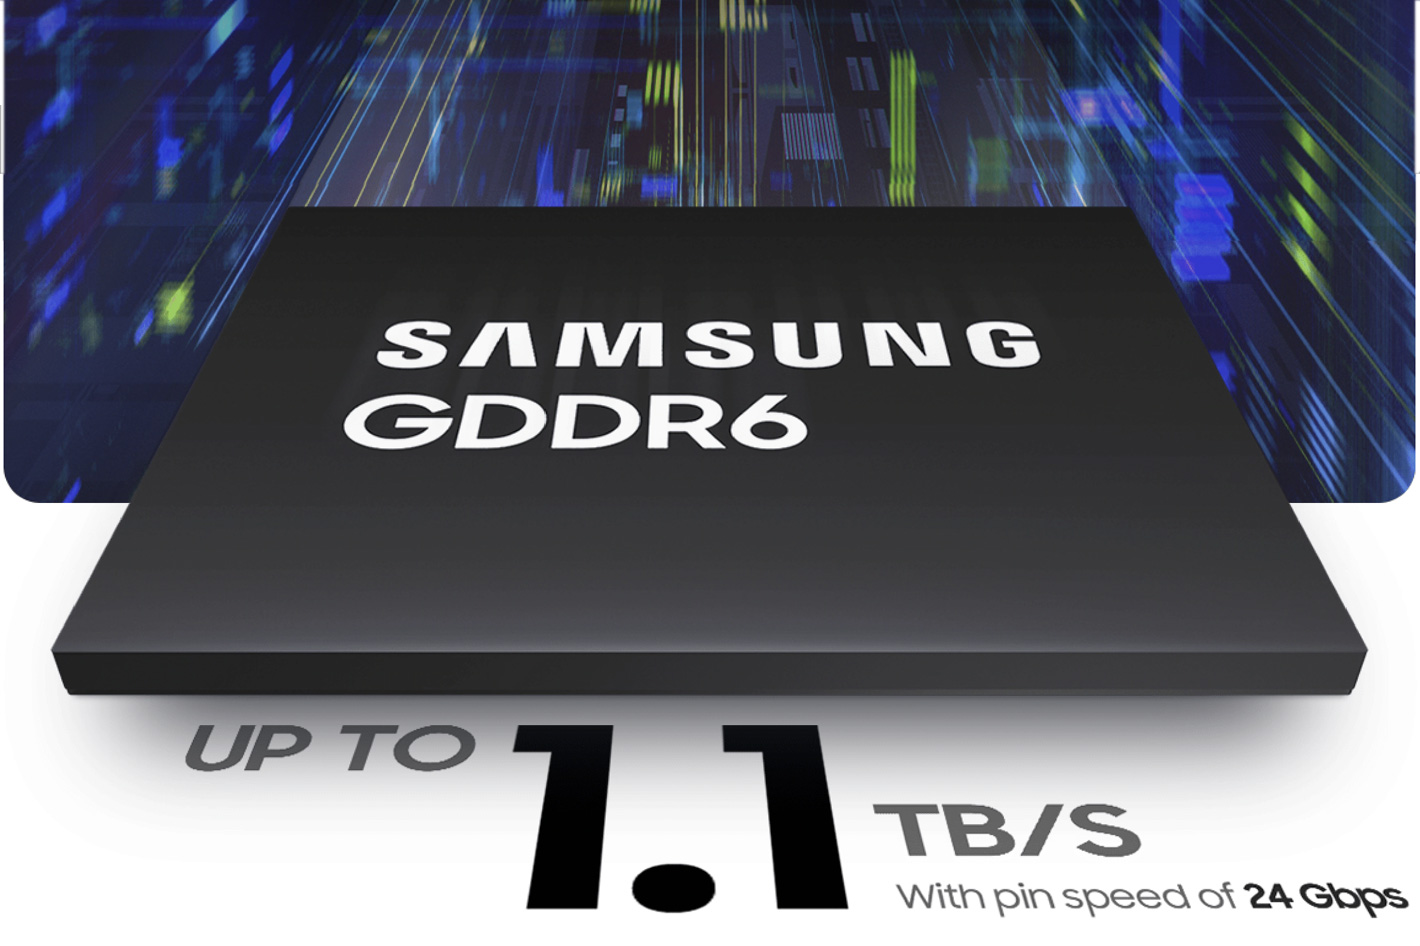 Samsung GDDR6: transfer 275 Full HD movies in one second